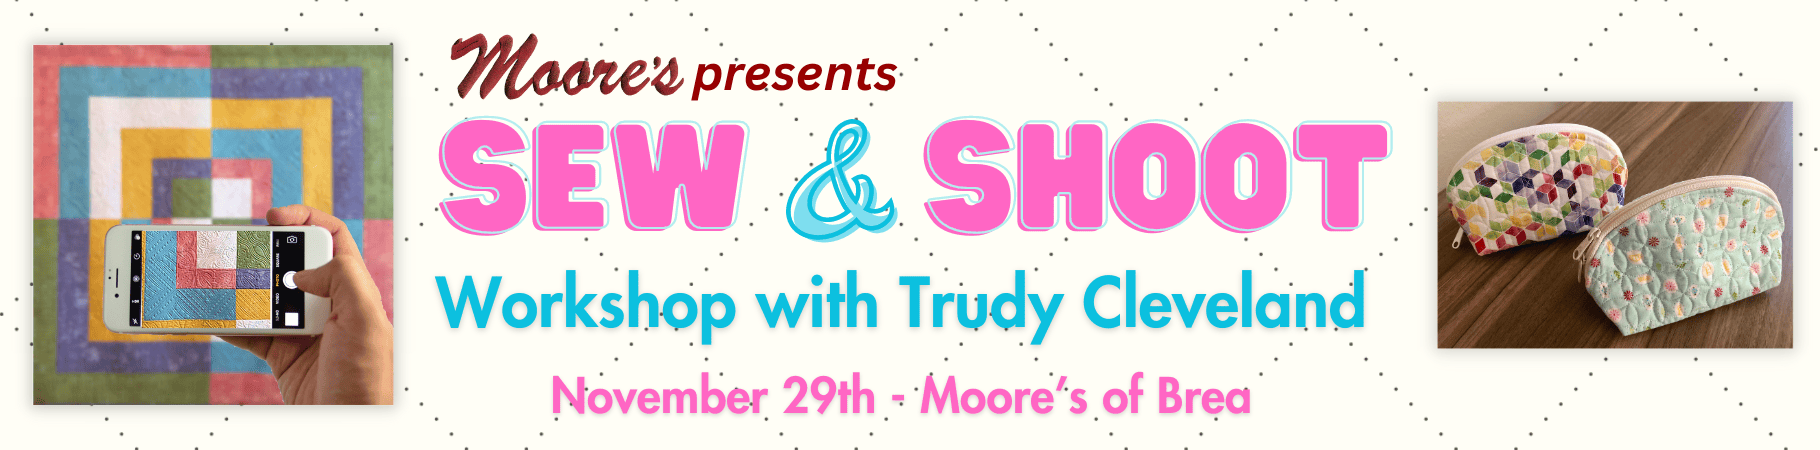 Sew & Shoot Workshop by Trudy Cleveland landing page banner image